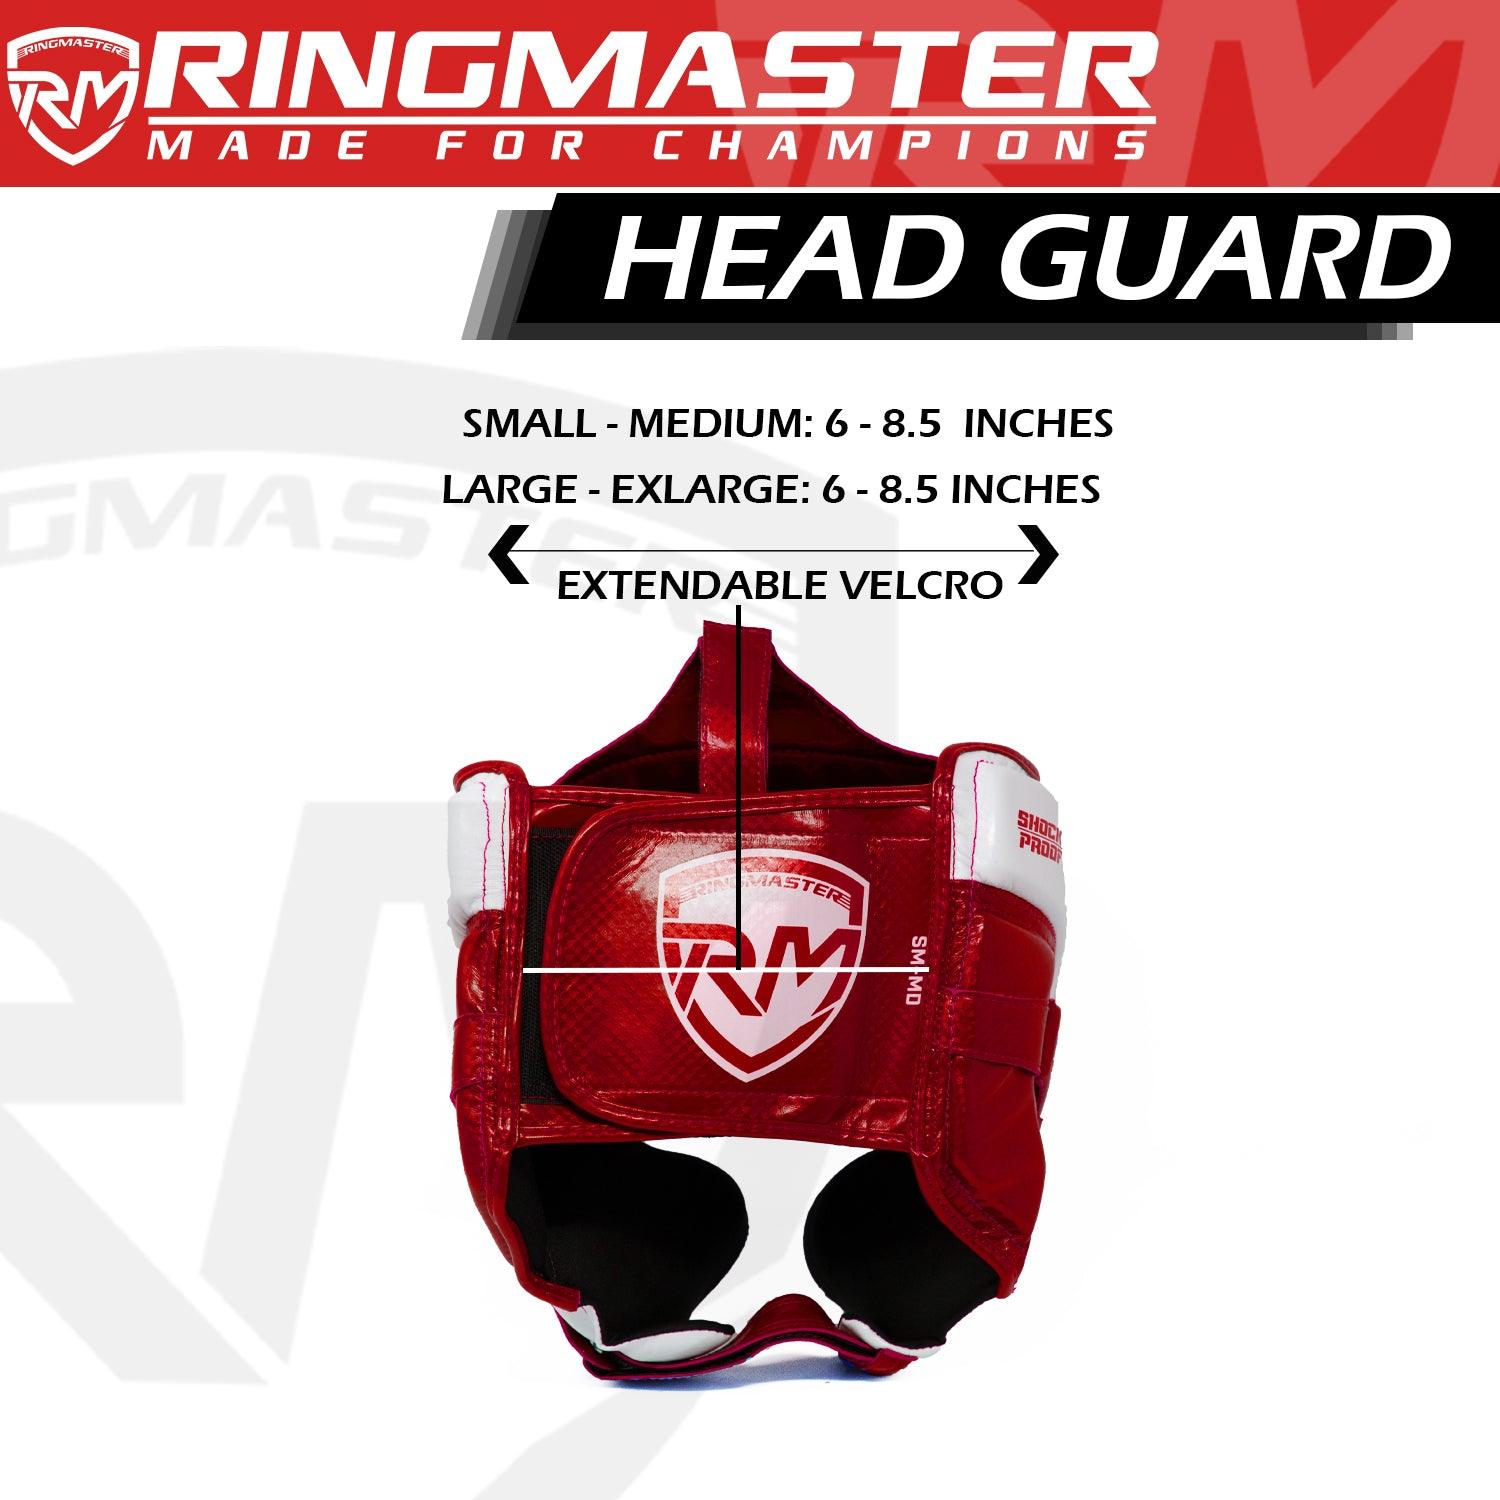 RingMaster Sports Boxing Head Guard red & white training sparring mma kickboxing martial arts muay thai